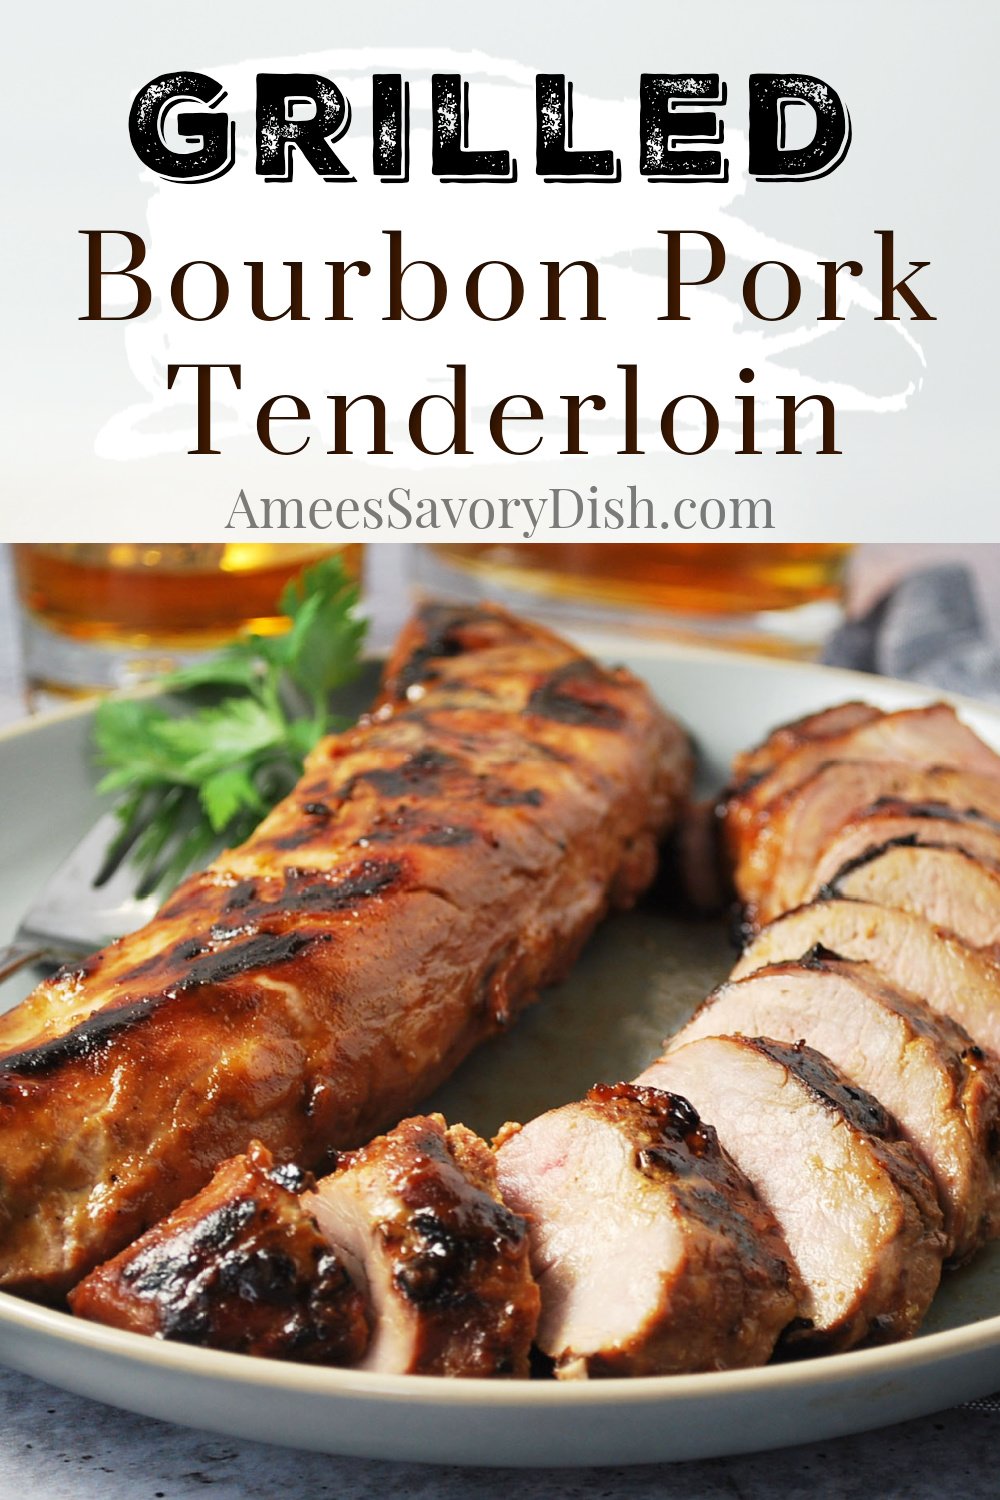 This grilled bourbon pork tenderloin is flavorful and easy made with Kentucky bourbon, soy sauce, brown sugar, garlic, dijon mustard, and spices.   This easy grill recipe is packed with protein and perfect for meal prep! #porktenderloin #grilledporktenderloin #bourbonpork #porkrecipe via @Ameessavorydish